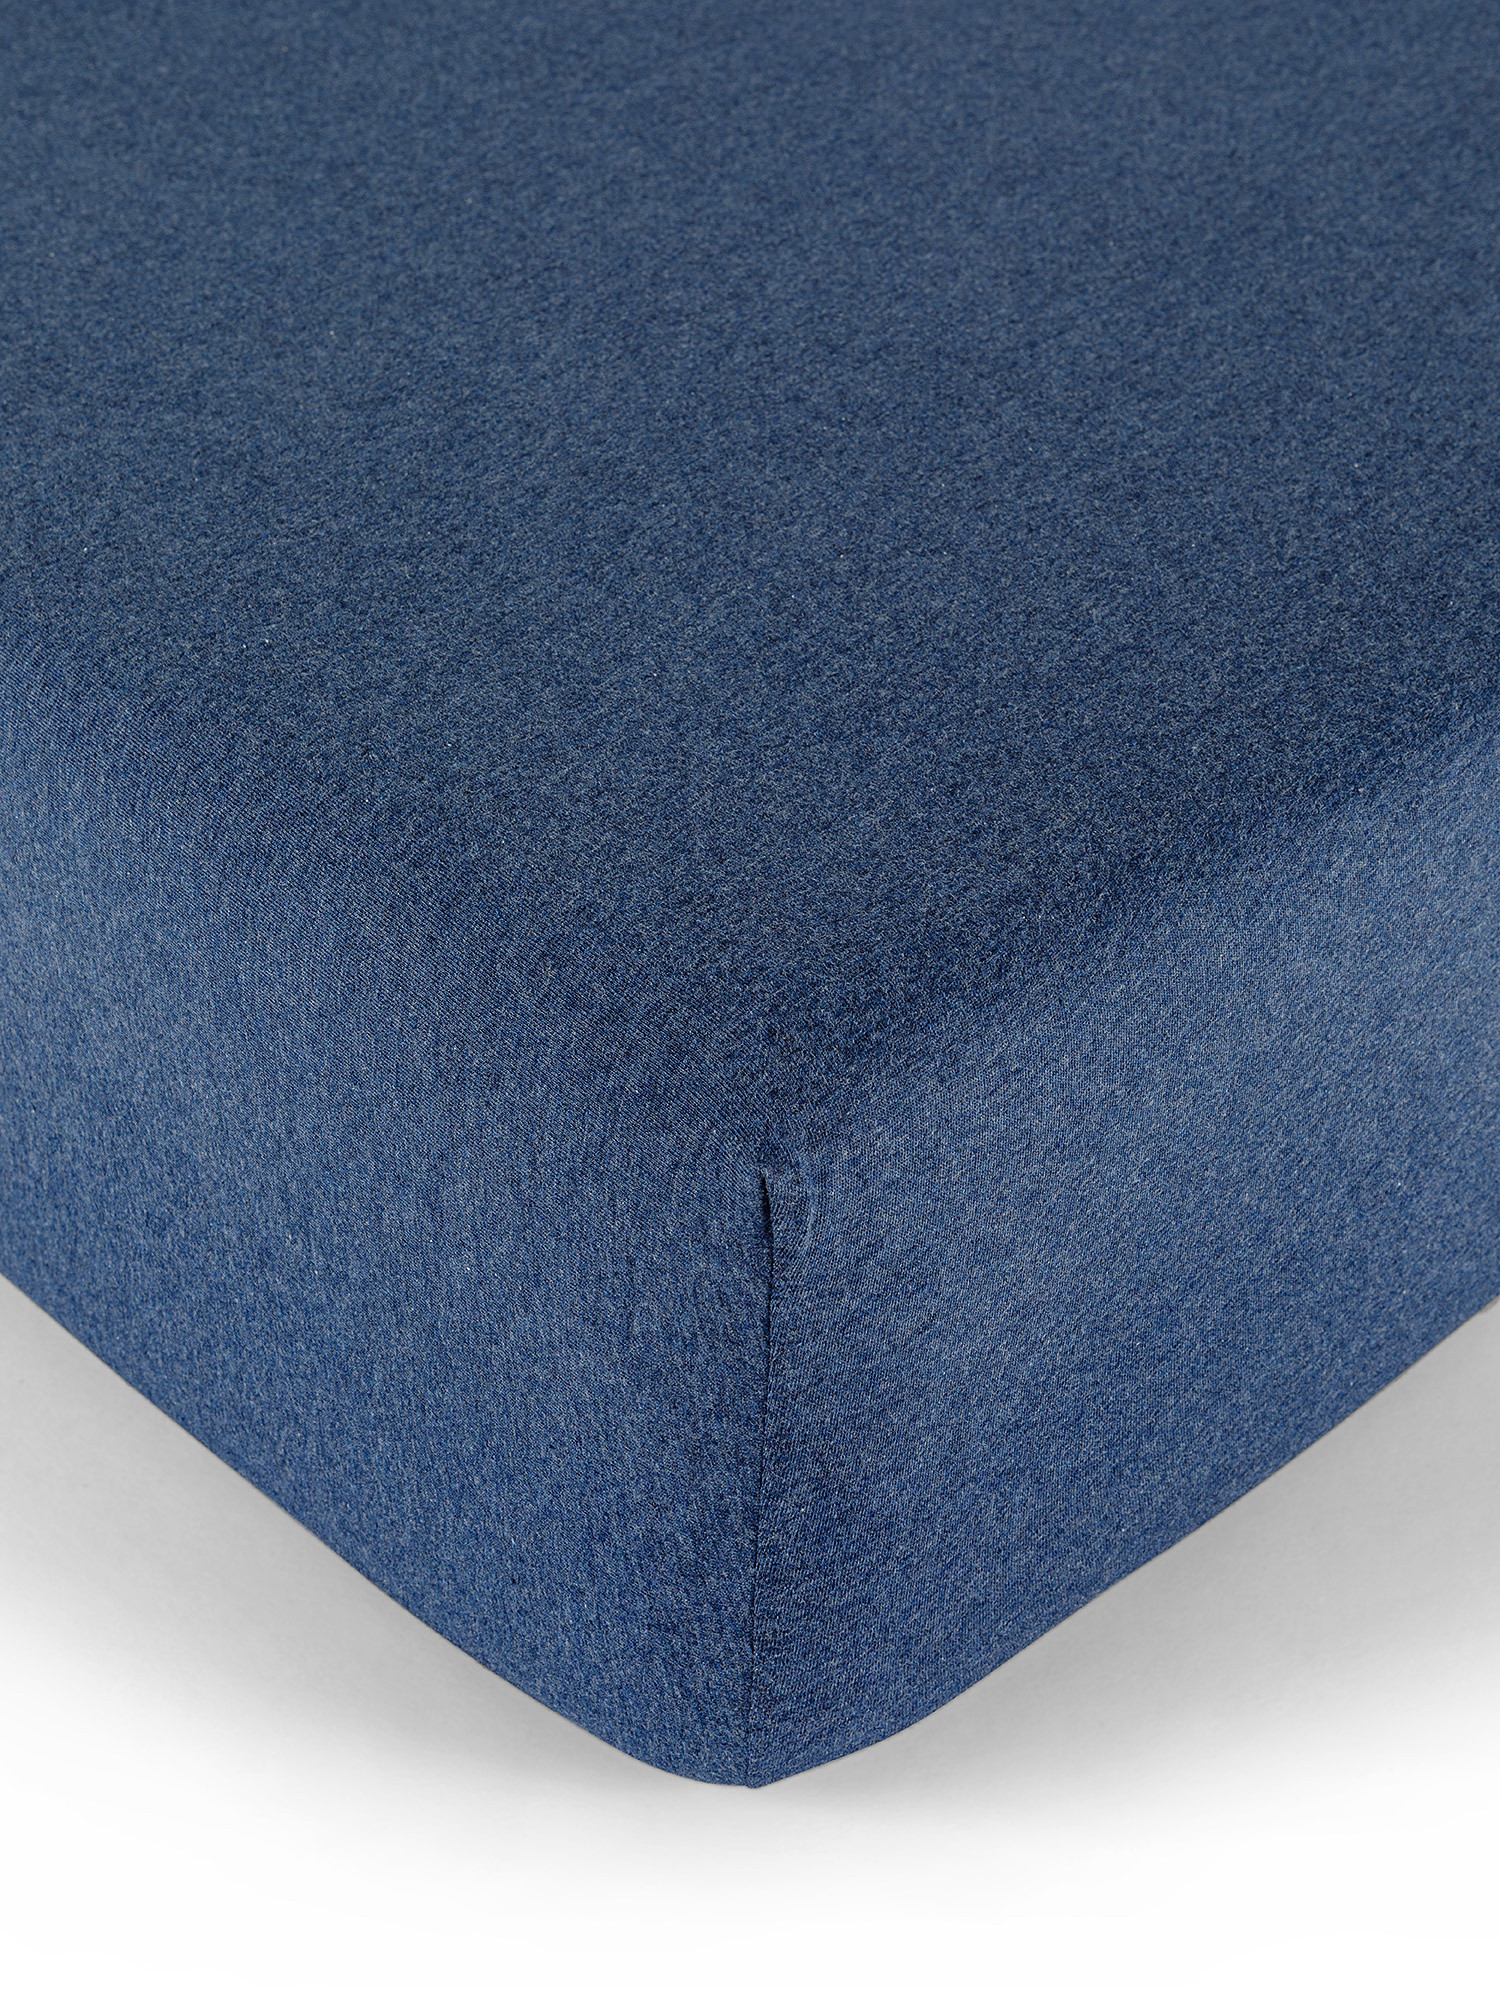 Solid color cotton jersey fitted sheet, Blue, large image number 0